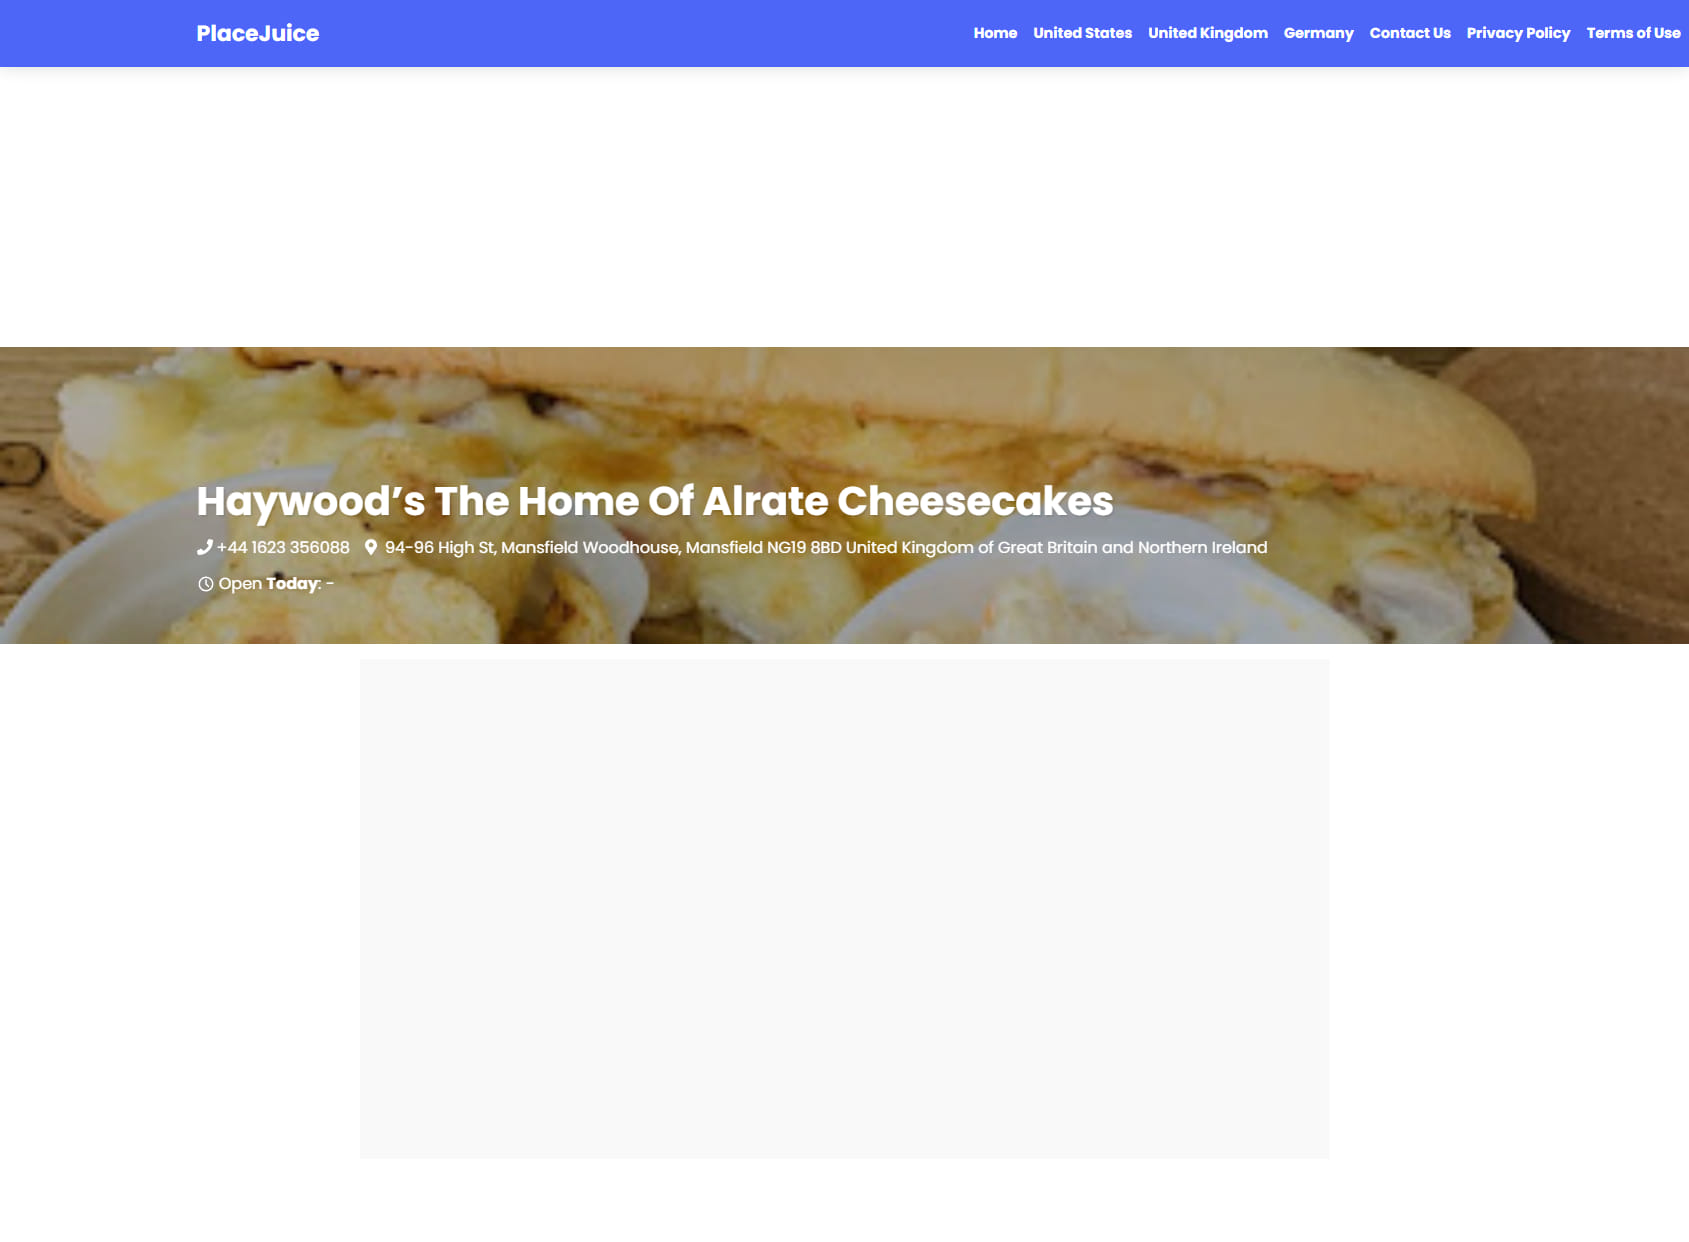 Haywood’s The Home Of Alrate Cheesecakes